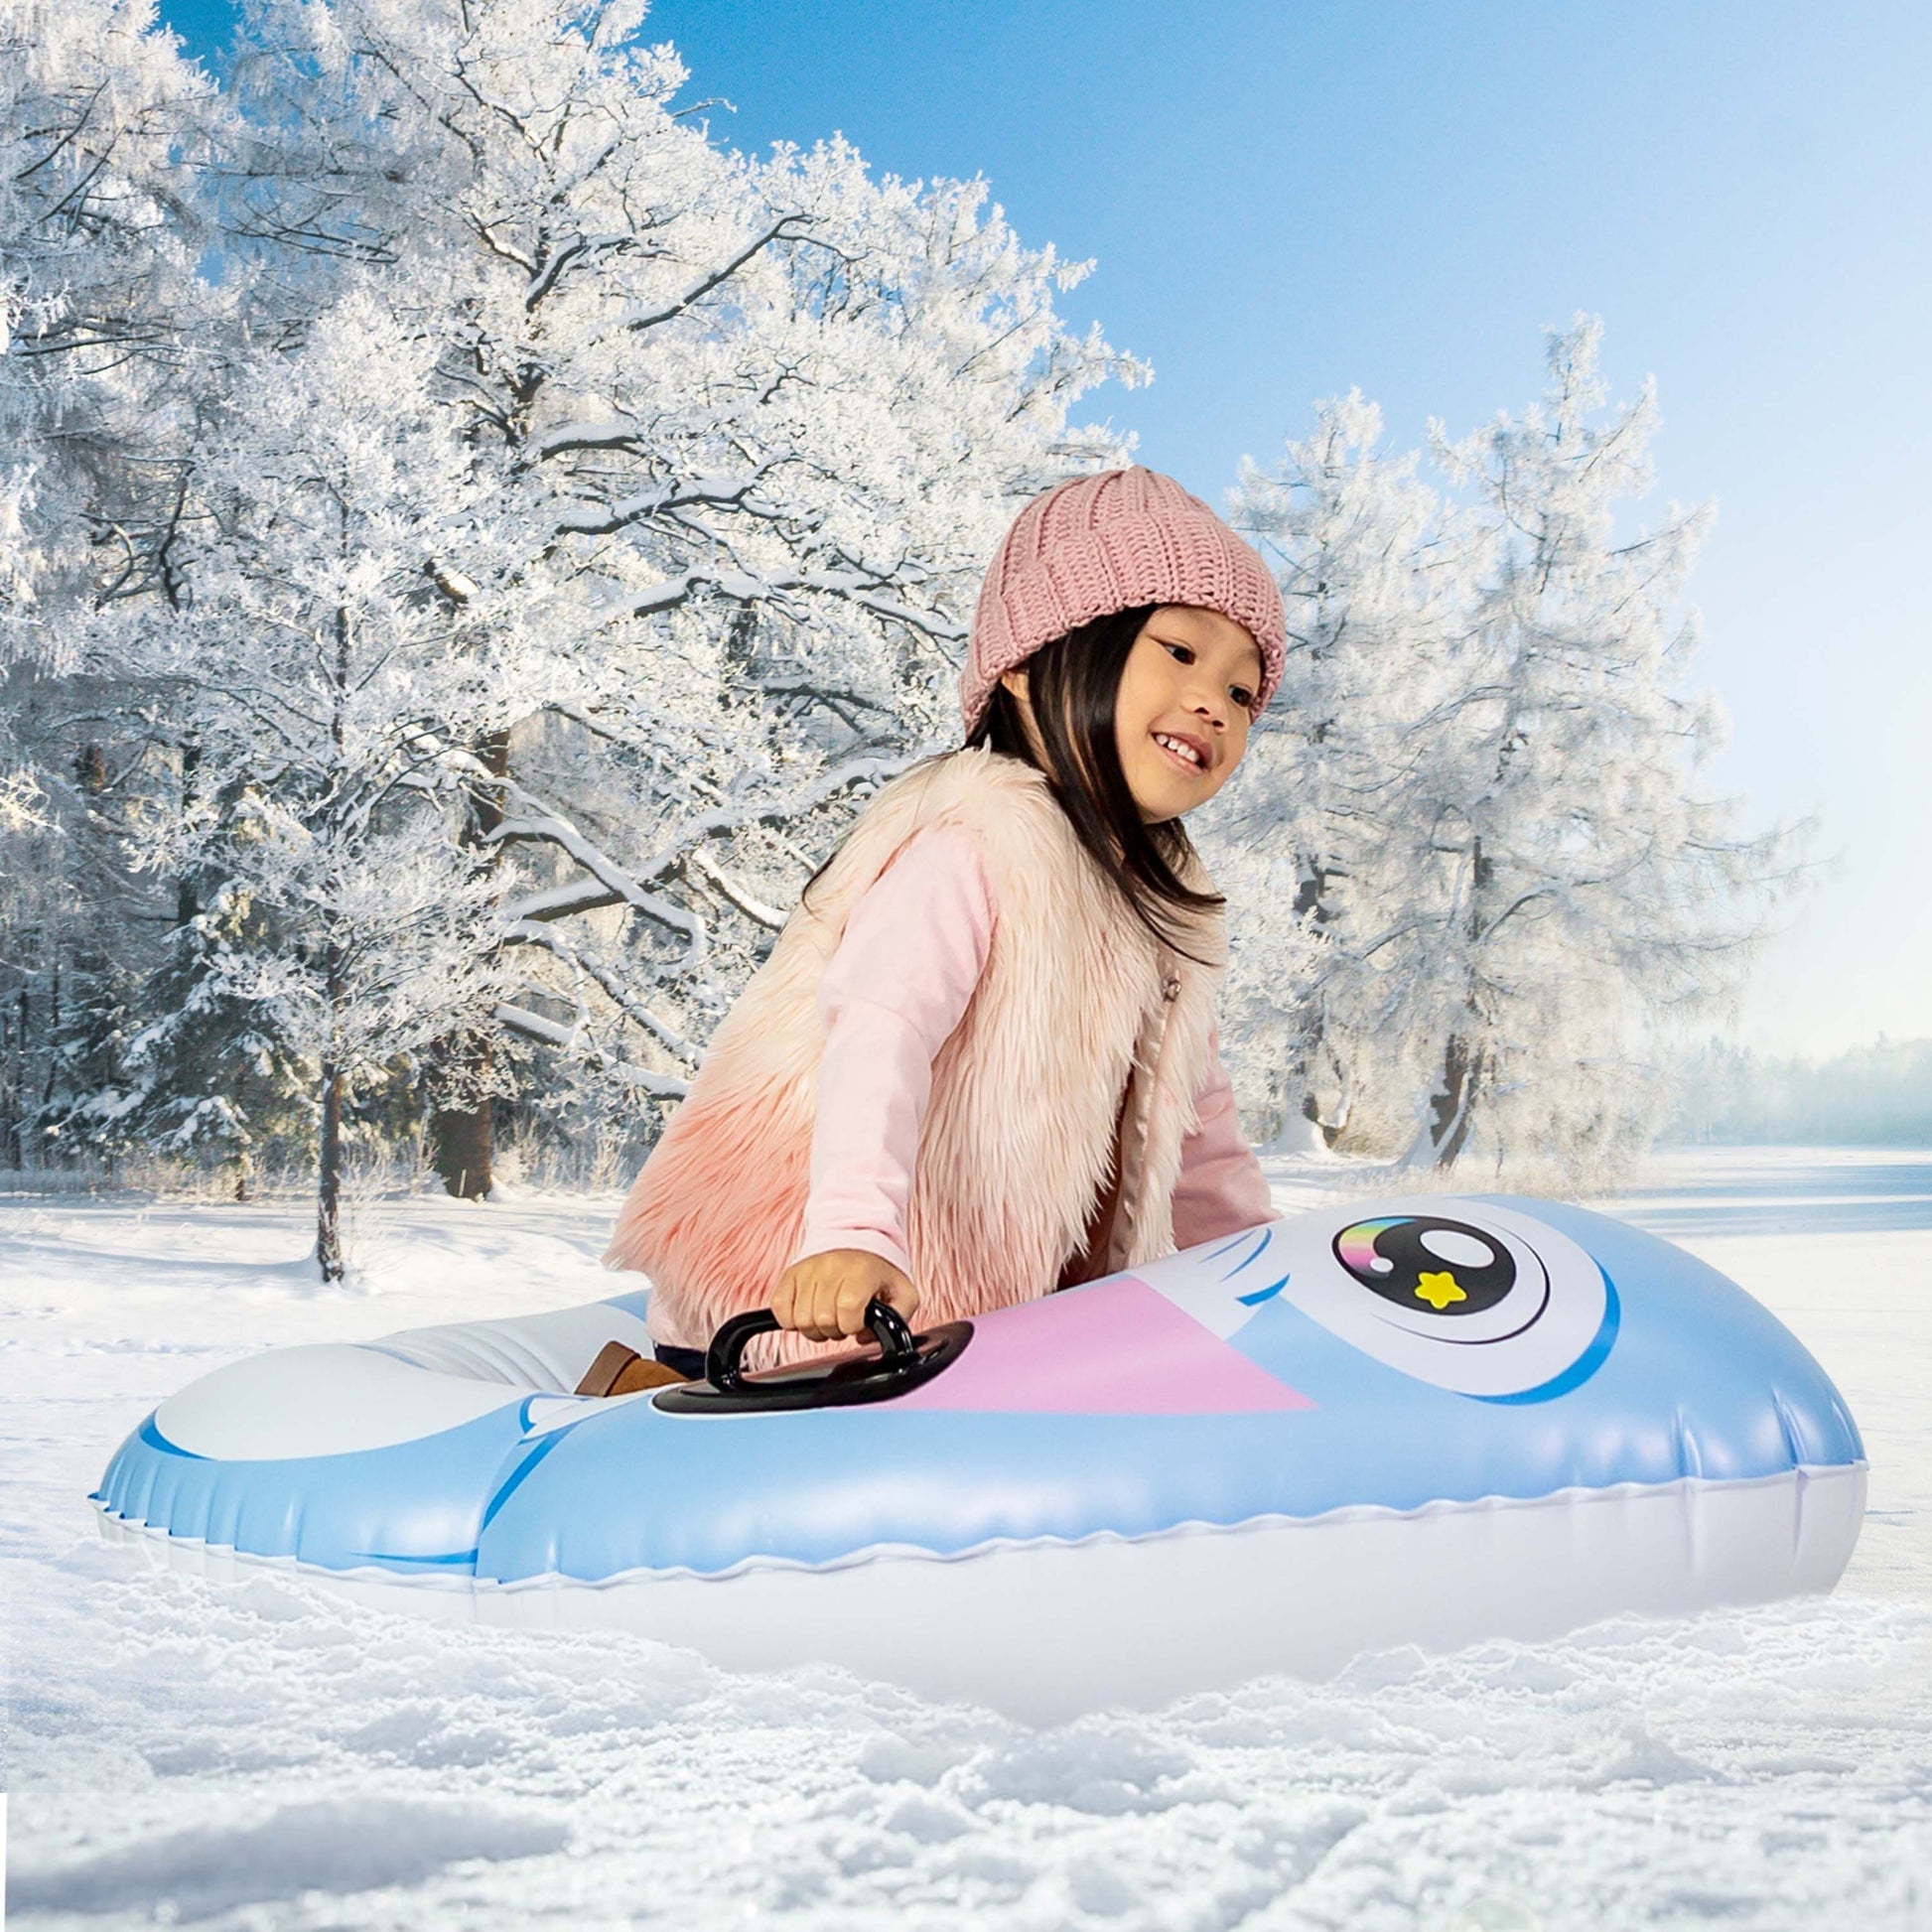 Snow Toys, Sleds, and Inflatables For Kids